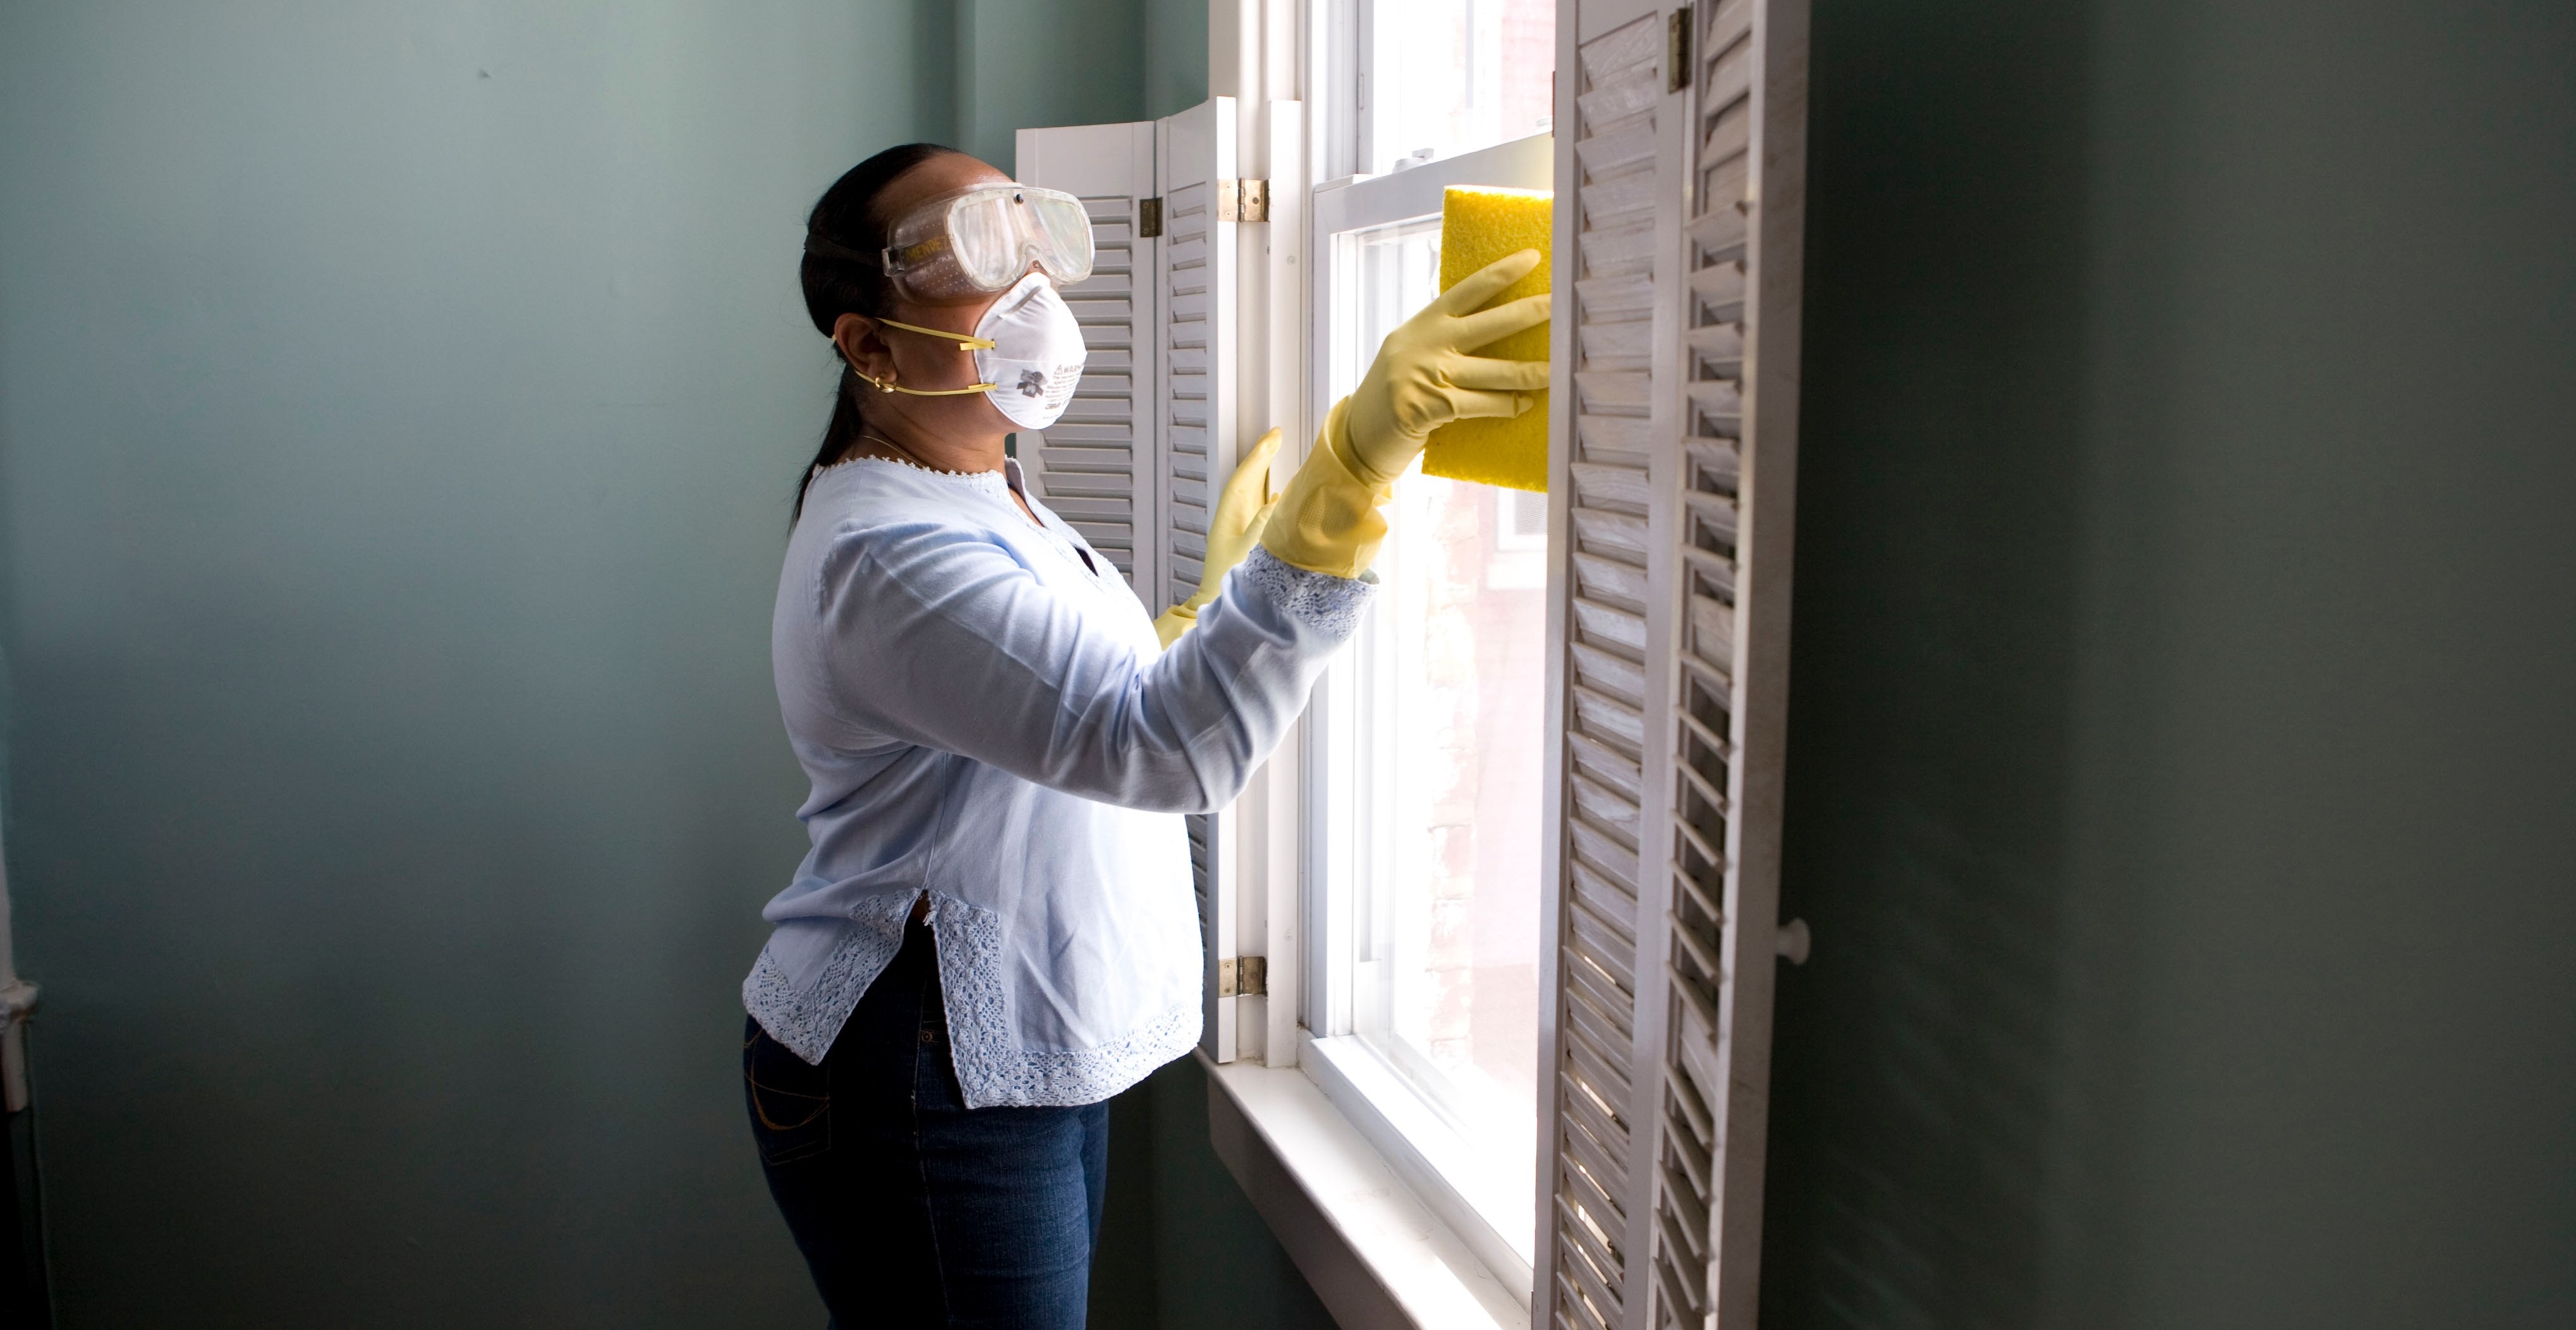 Woman in white long sleeve shirt and blue denim jeans cleaning a glass window with a yellow sponge while wearing a mask, goggles and yellow gloves